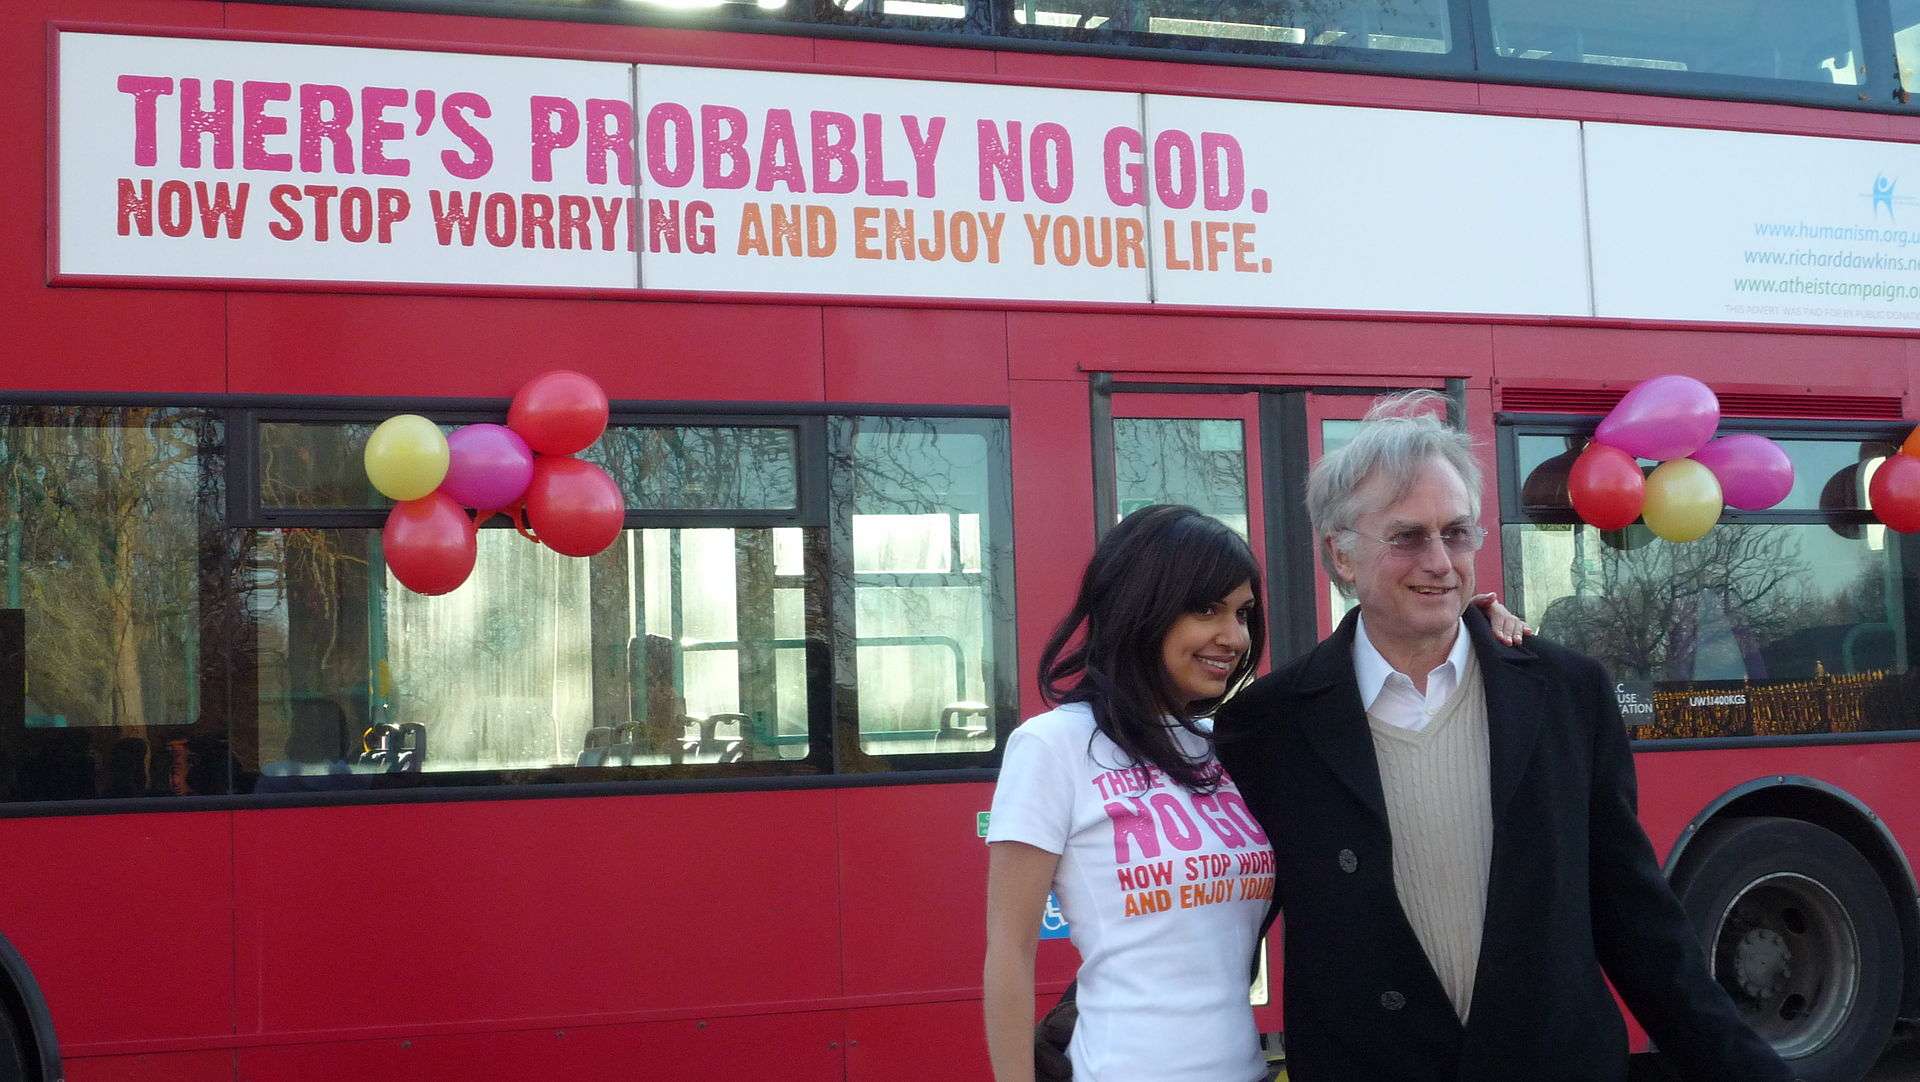 With Ariane Sherine at the Atheist Bus Campaign launch in London